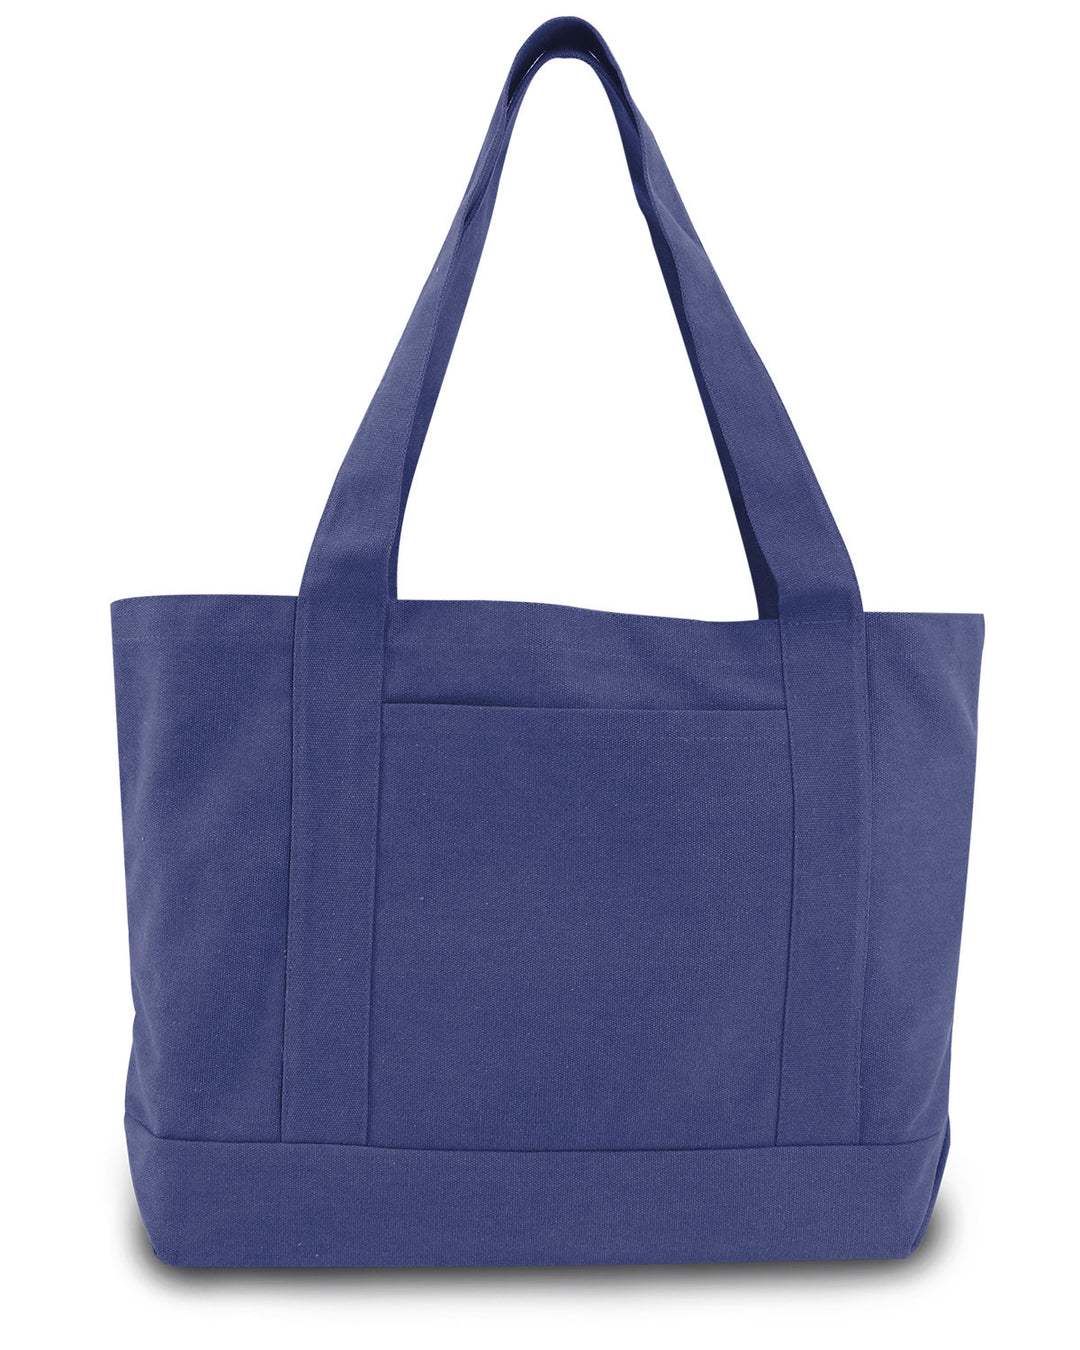 12 oz. Pigment Dyed Boat Tote (8870)